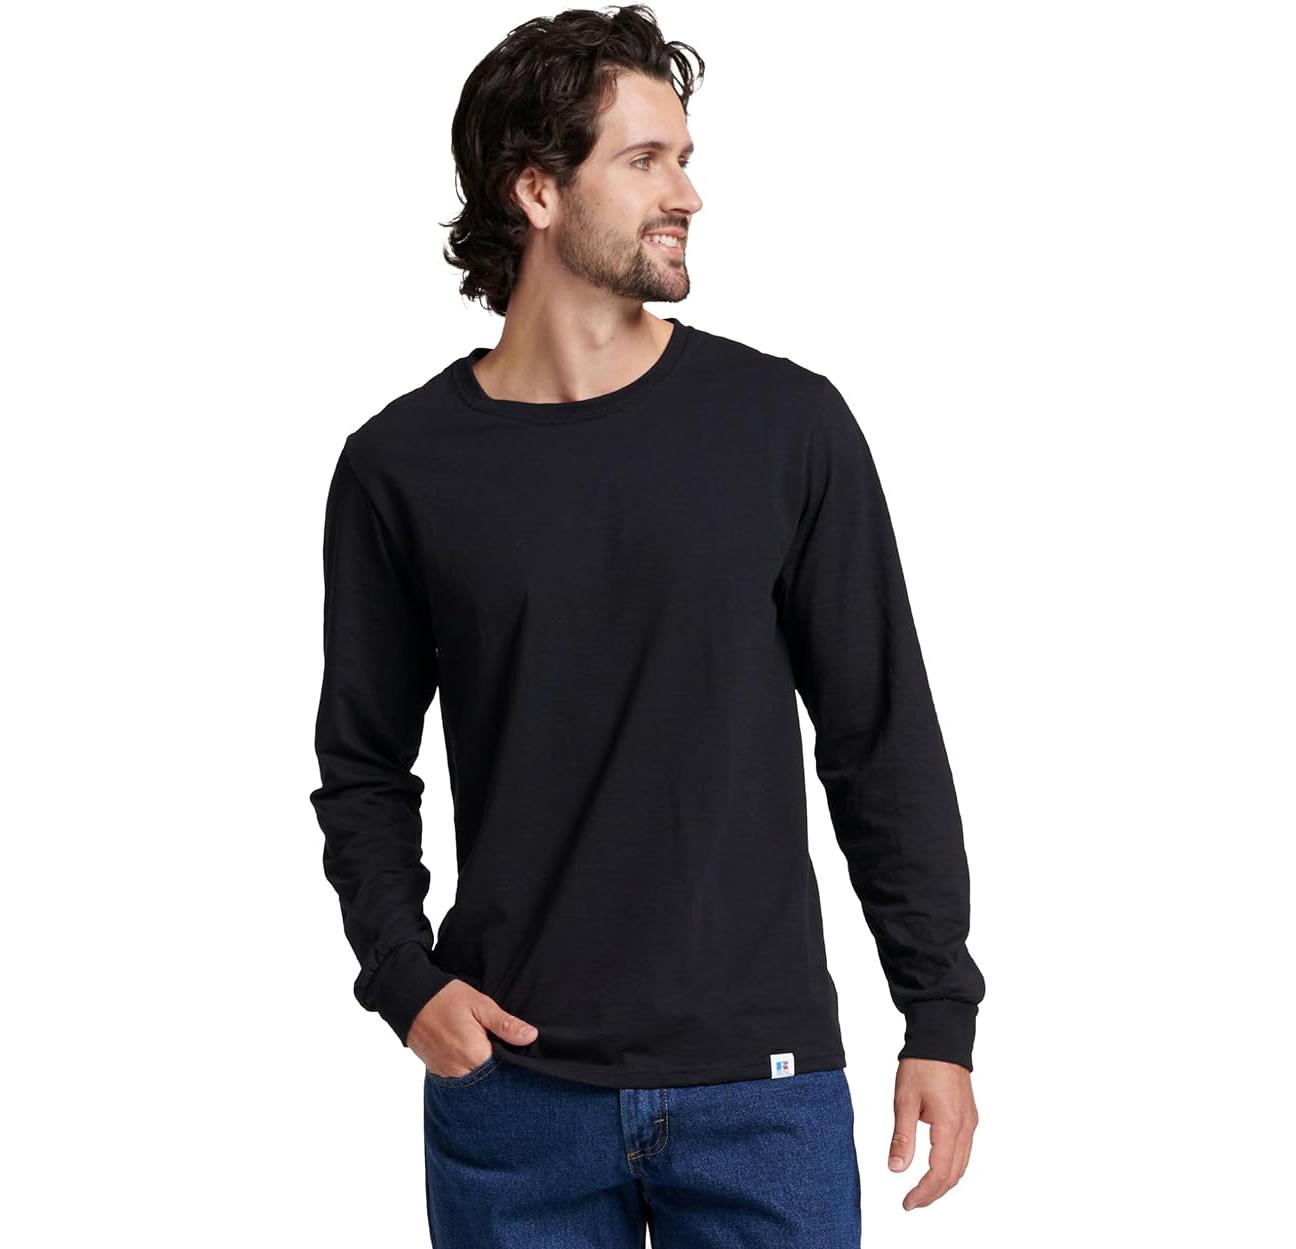 Russell Athletic Dri-Power UPF 30+ Cotton Blend Long Sleeve Tee for $4.76